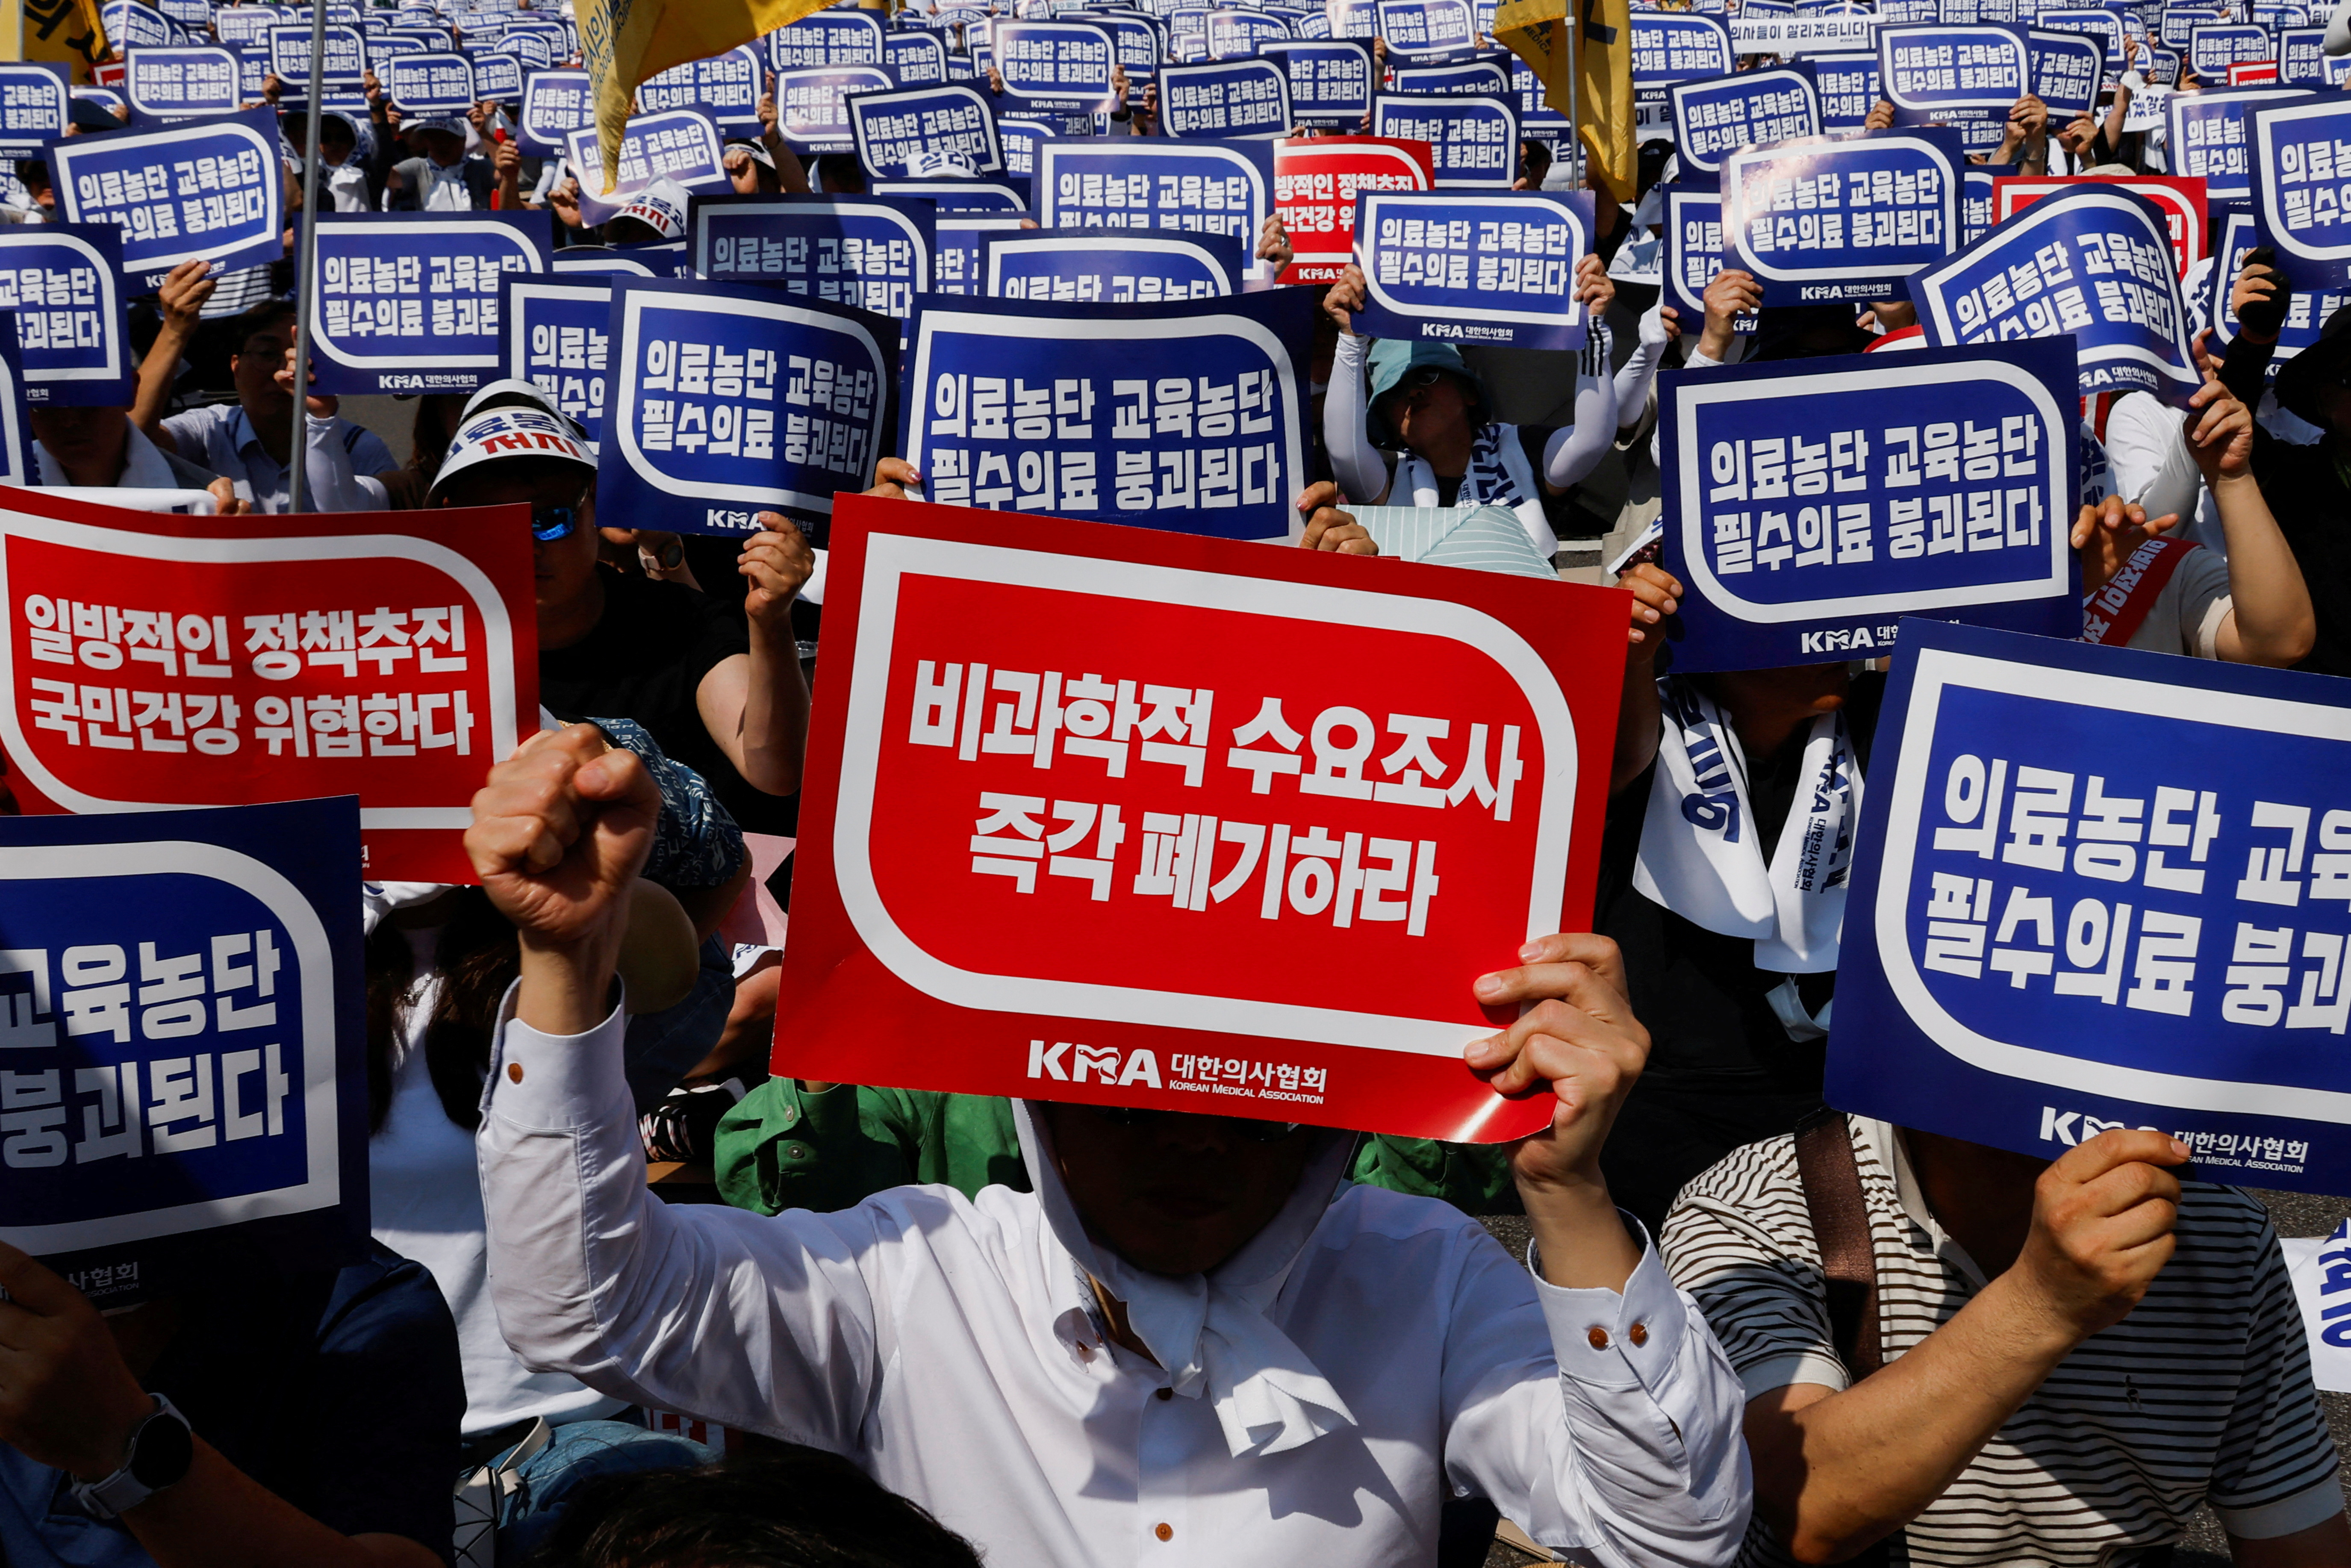 Doctors strike and shout slogans during a rally to protest against government plans to increase medical school admissions and healthcare reform in Seoul